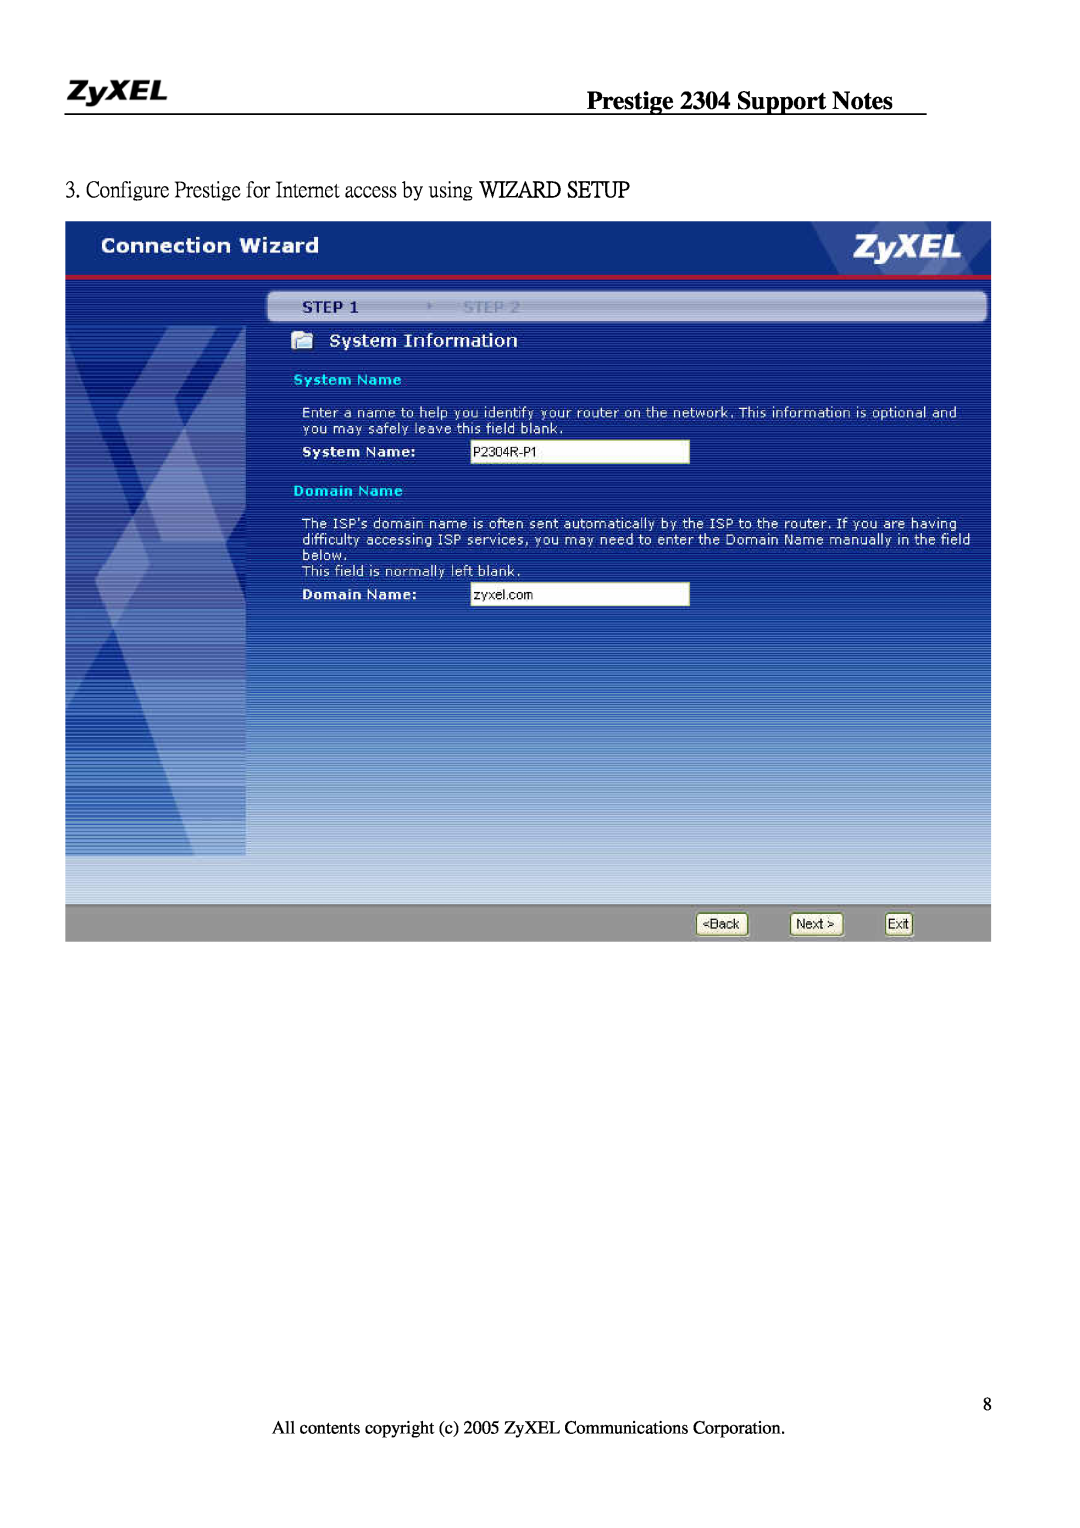 ZyXEL Communications 2304R-P1 Prestige 2304 Support Notes, Configure Prestige for Internet access by using WIZARD SETUP 